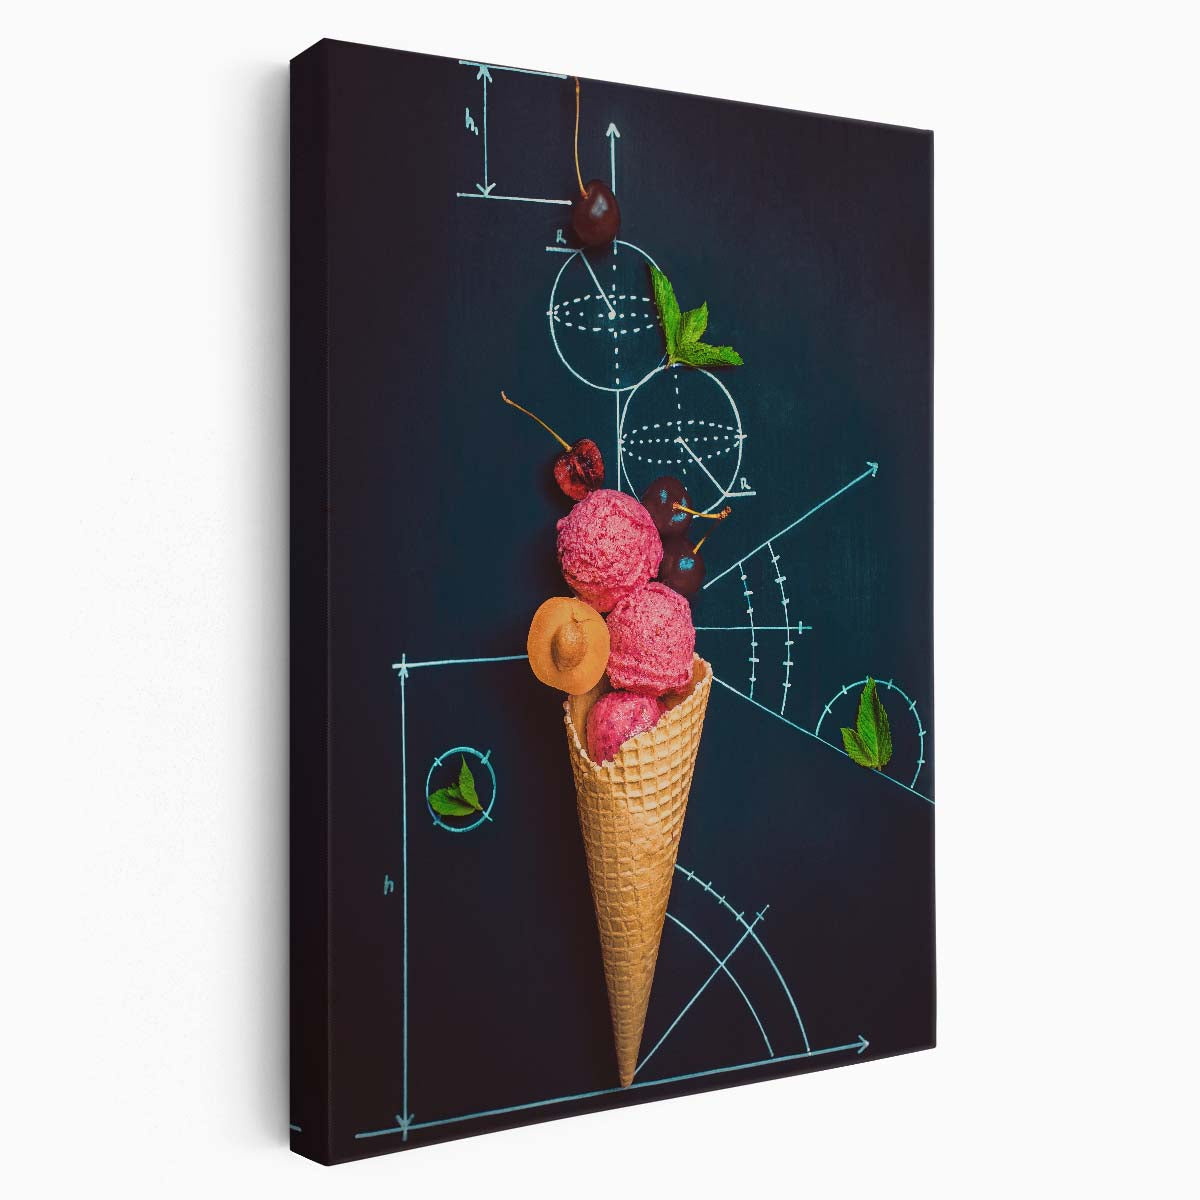 Geometric Still Life Photography of Ice Cream with Cherries & Mint by Luxuriance Designs, made in USA